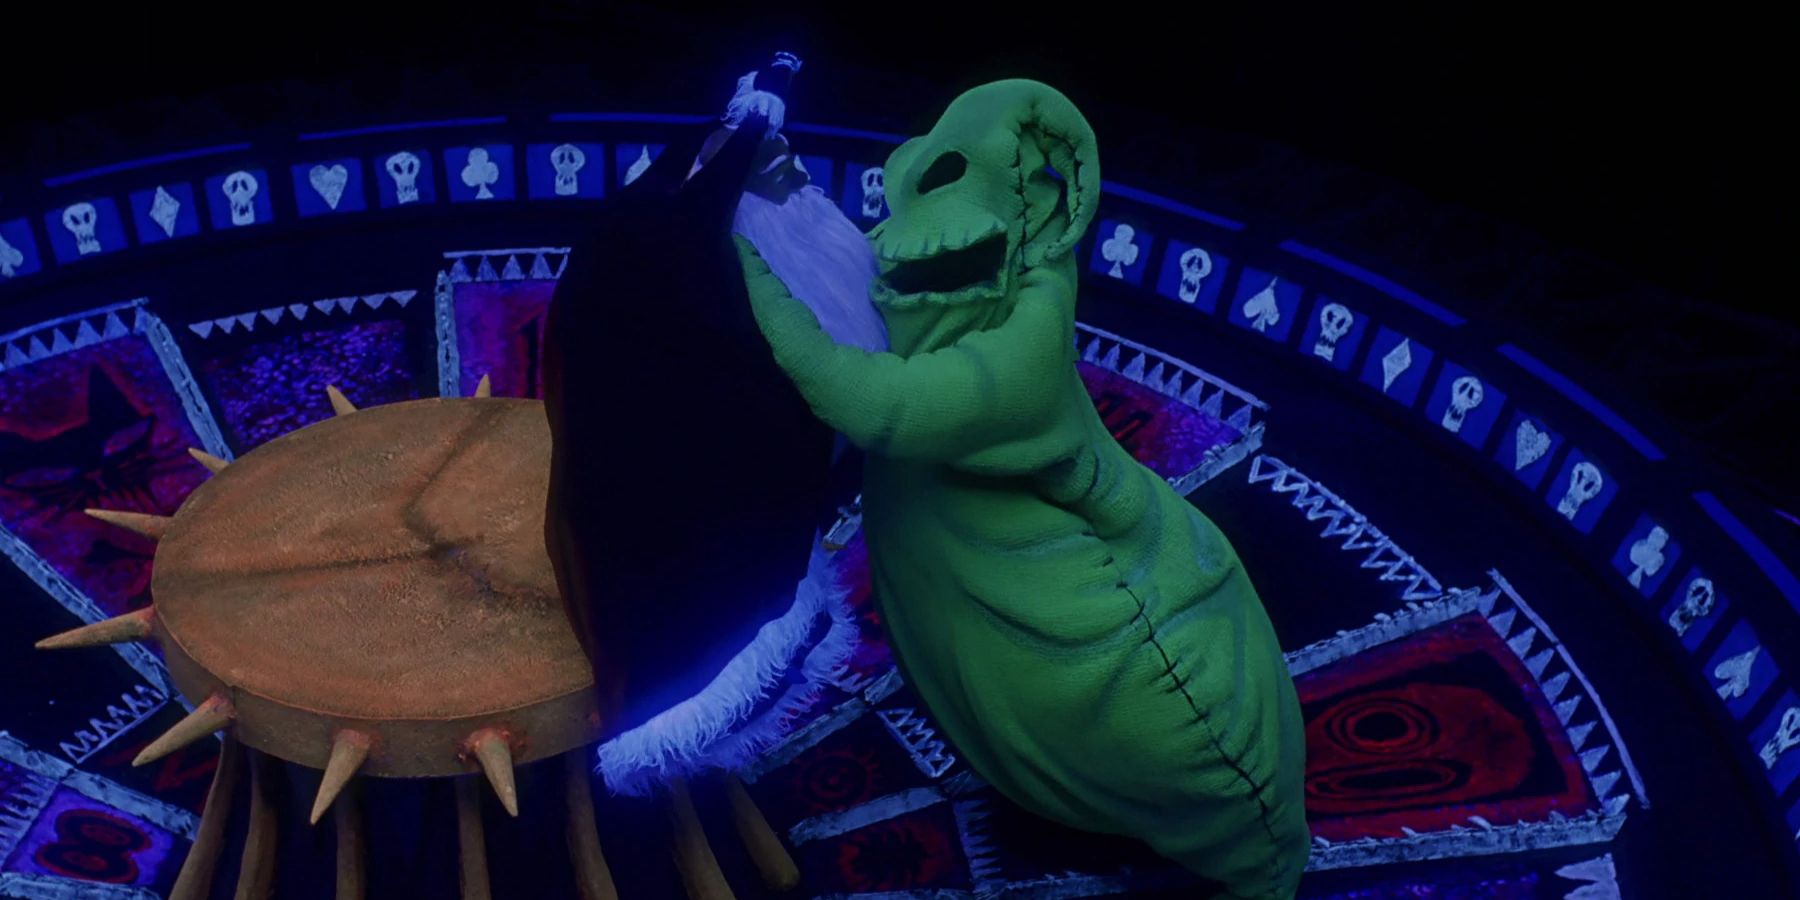 Santa Claus and Oogie Boogie in The Nightmare Before Christmas